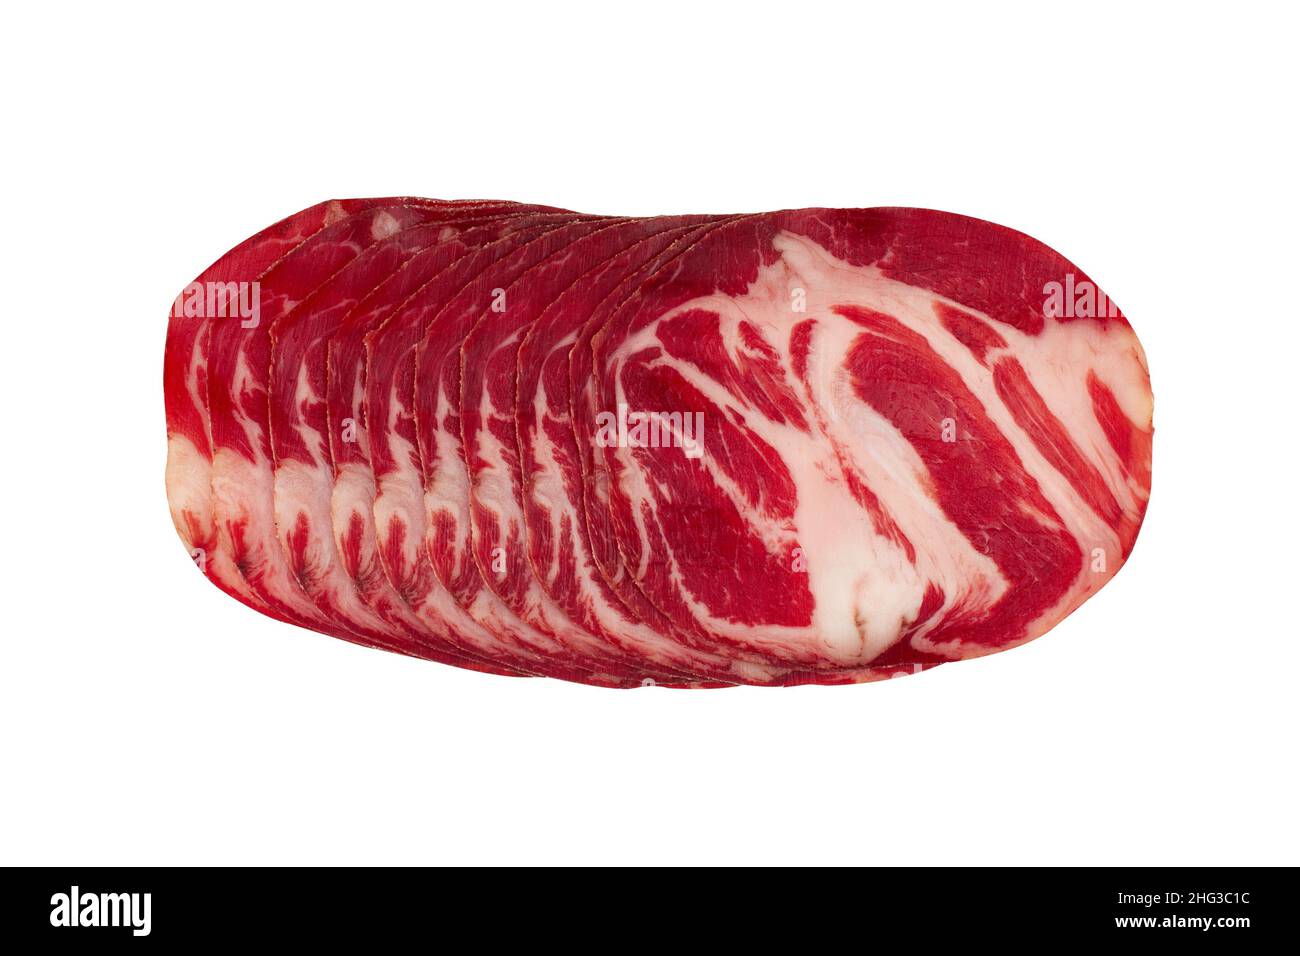 top view of slices of smoked pork loin ham with red color and fat isolated on white background Stock Photo